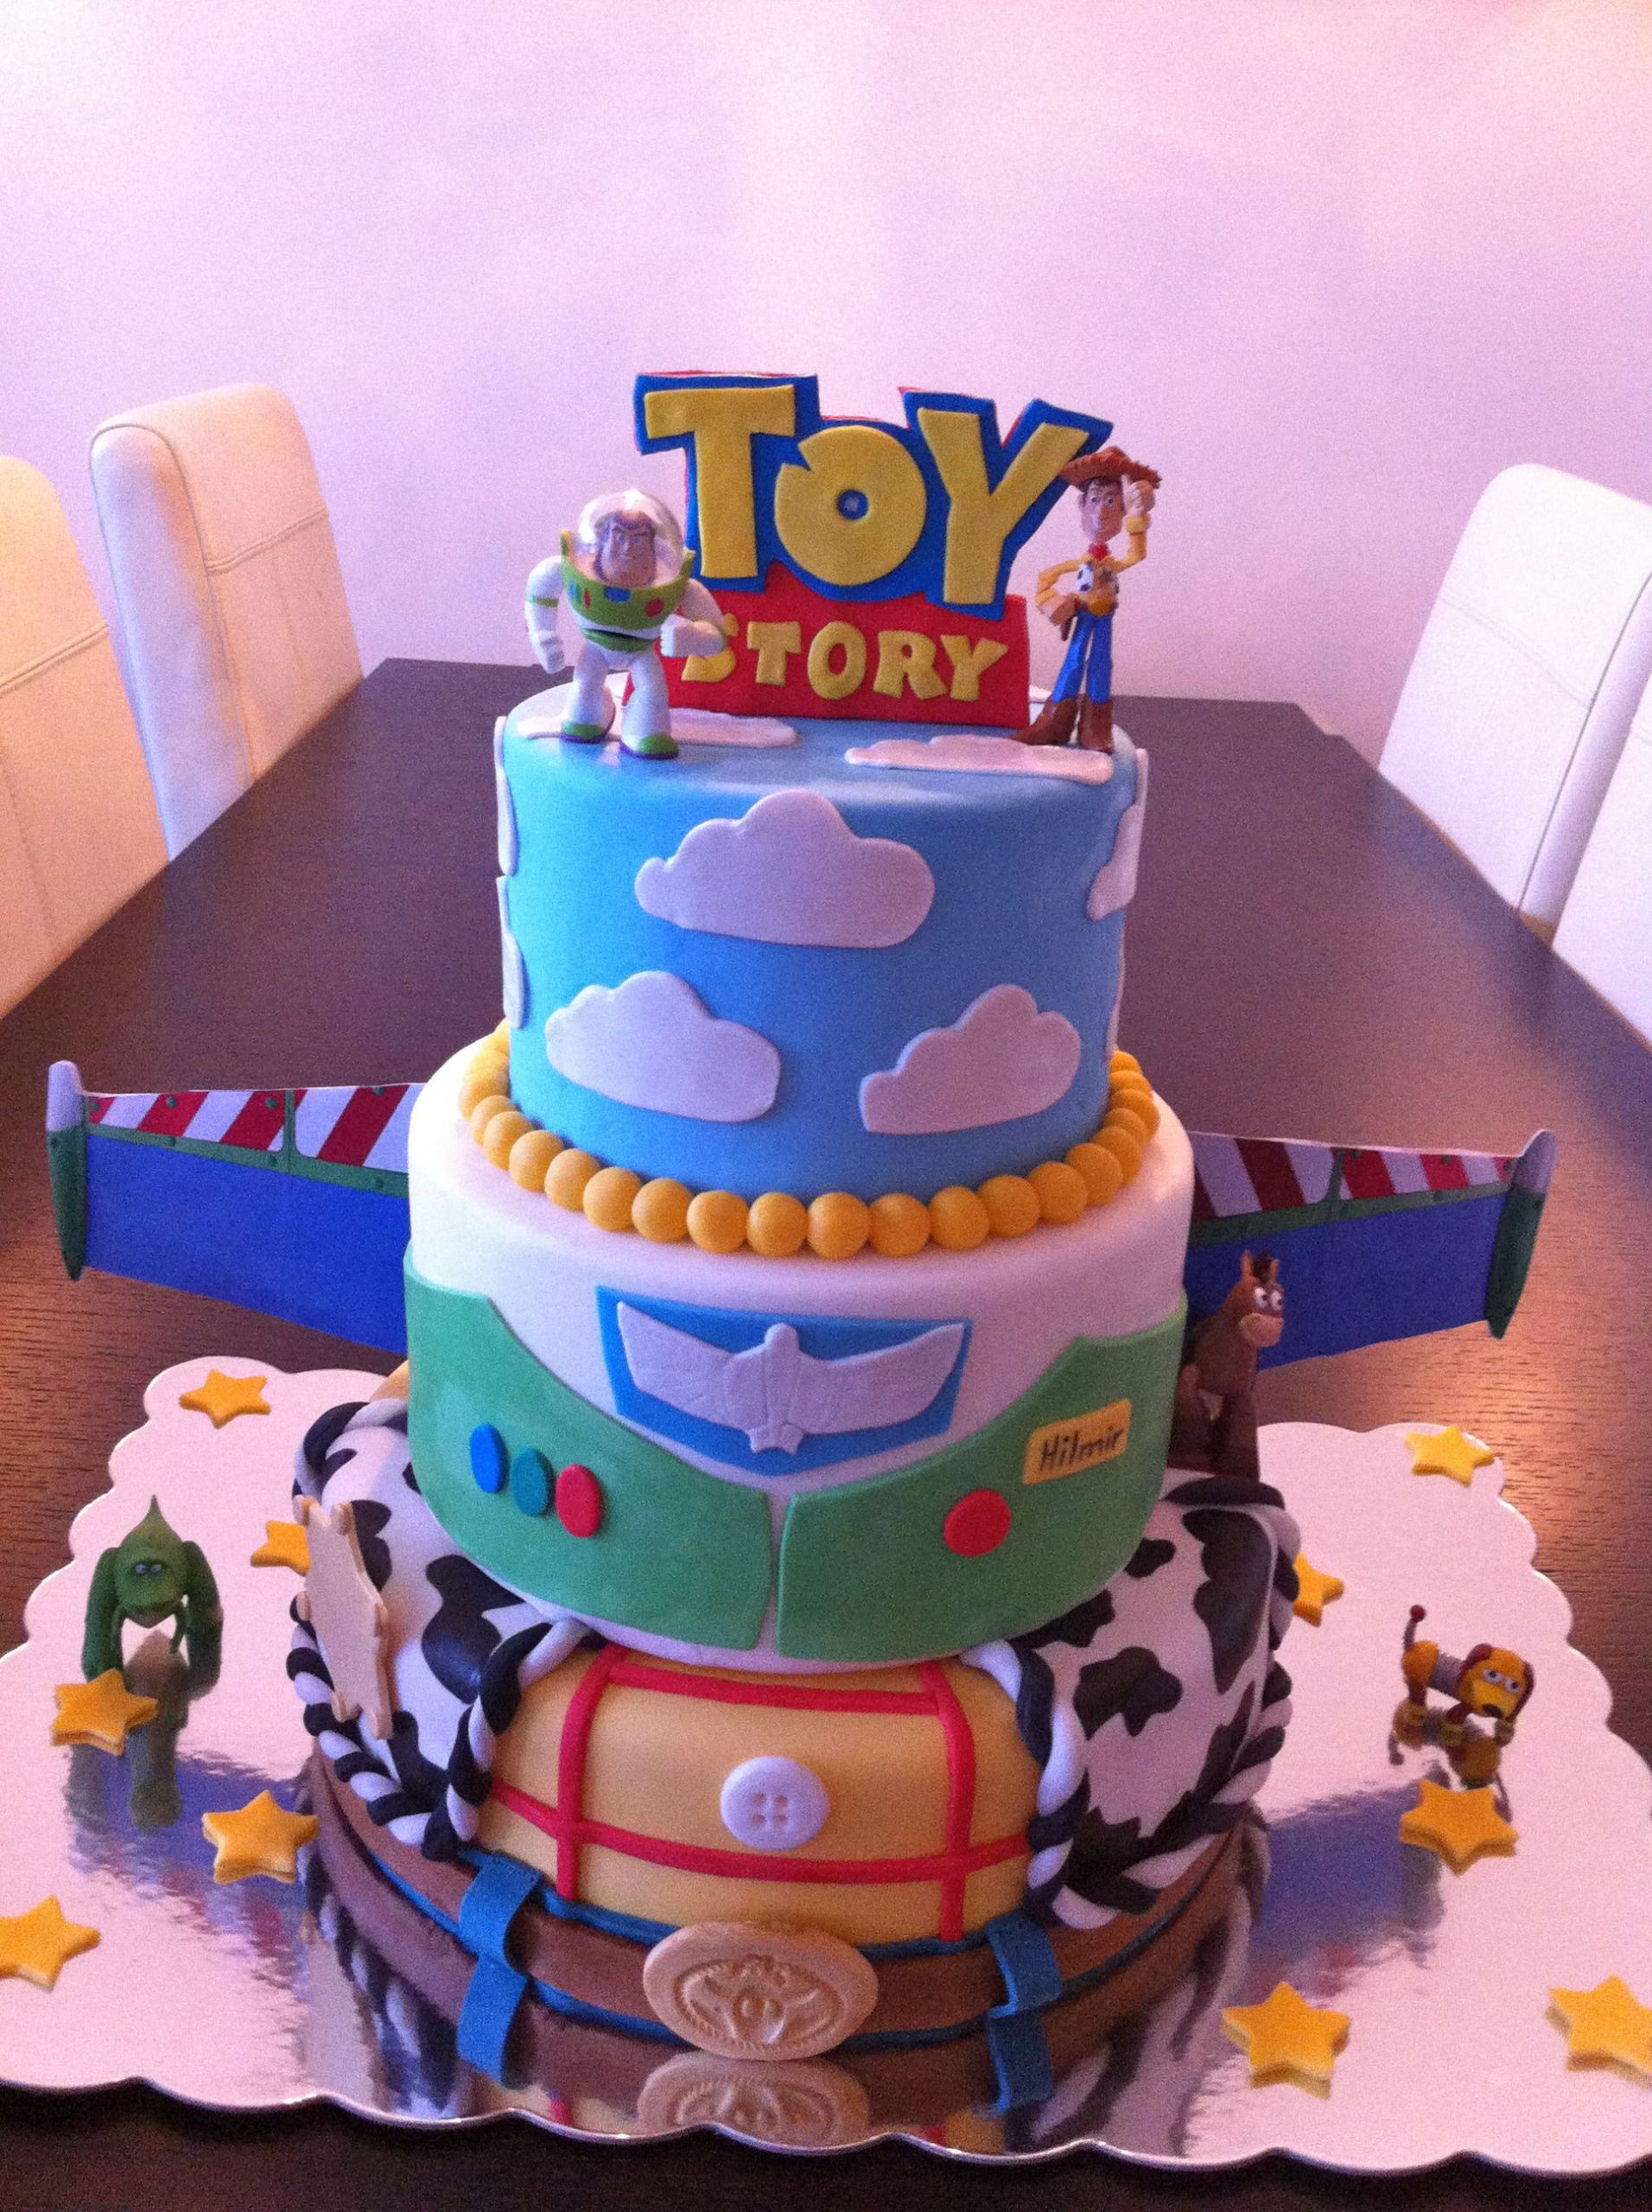 Disney World Birthday Cakes
 This is a Toy Story cake I made for a Disney themed cake